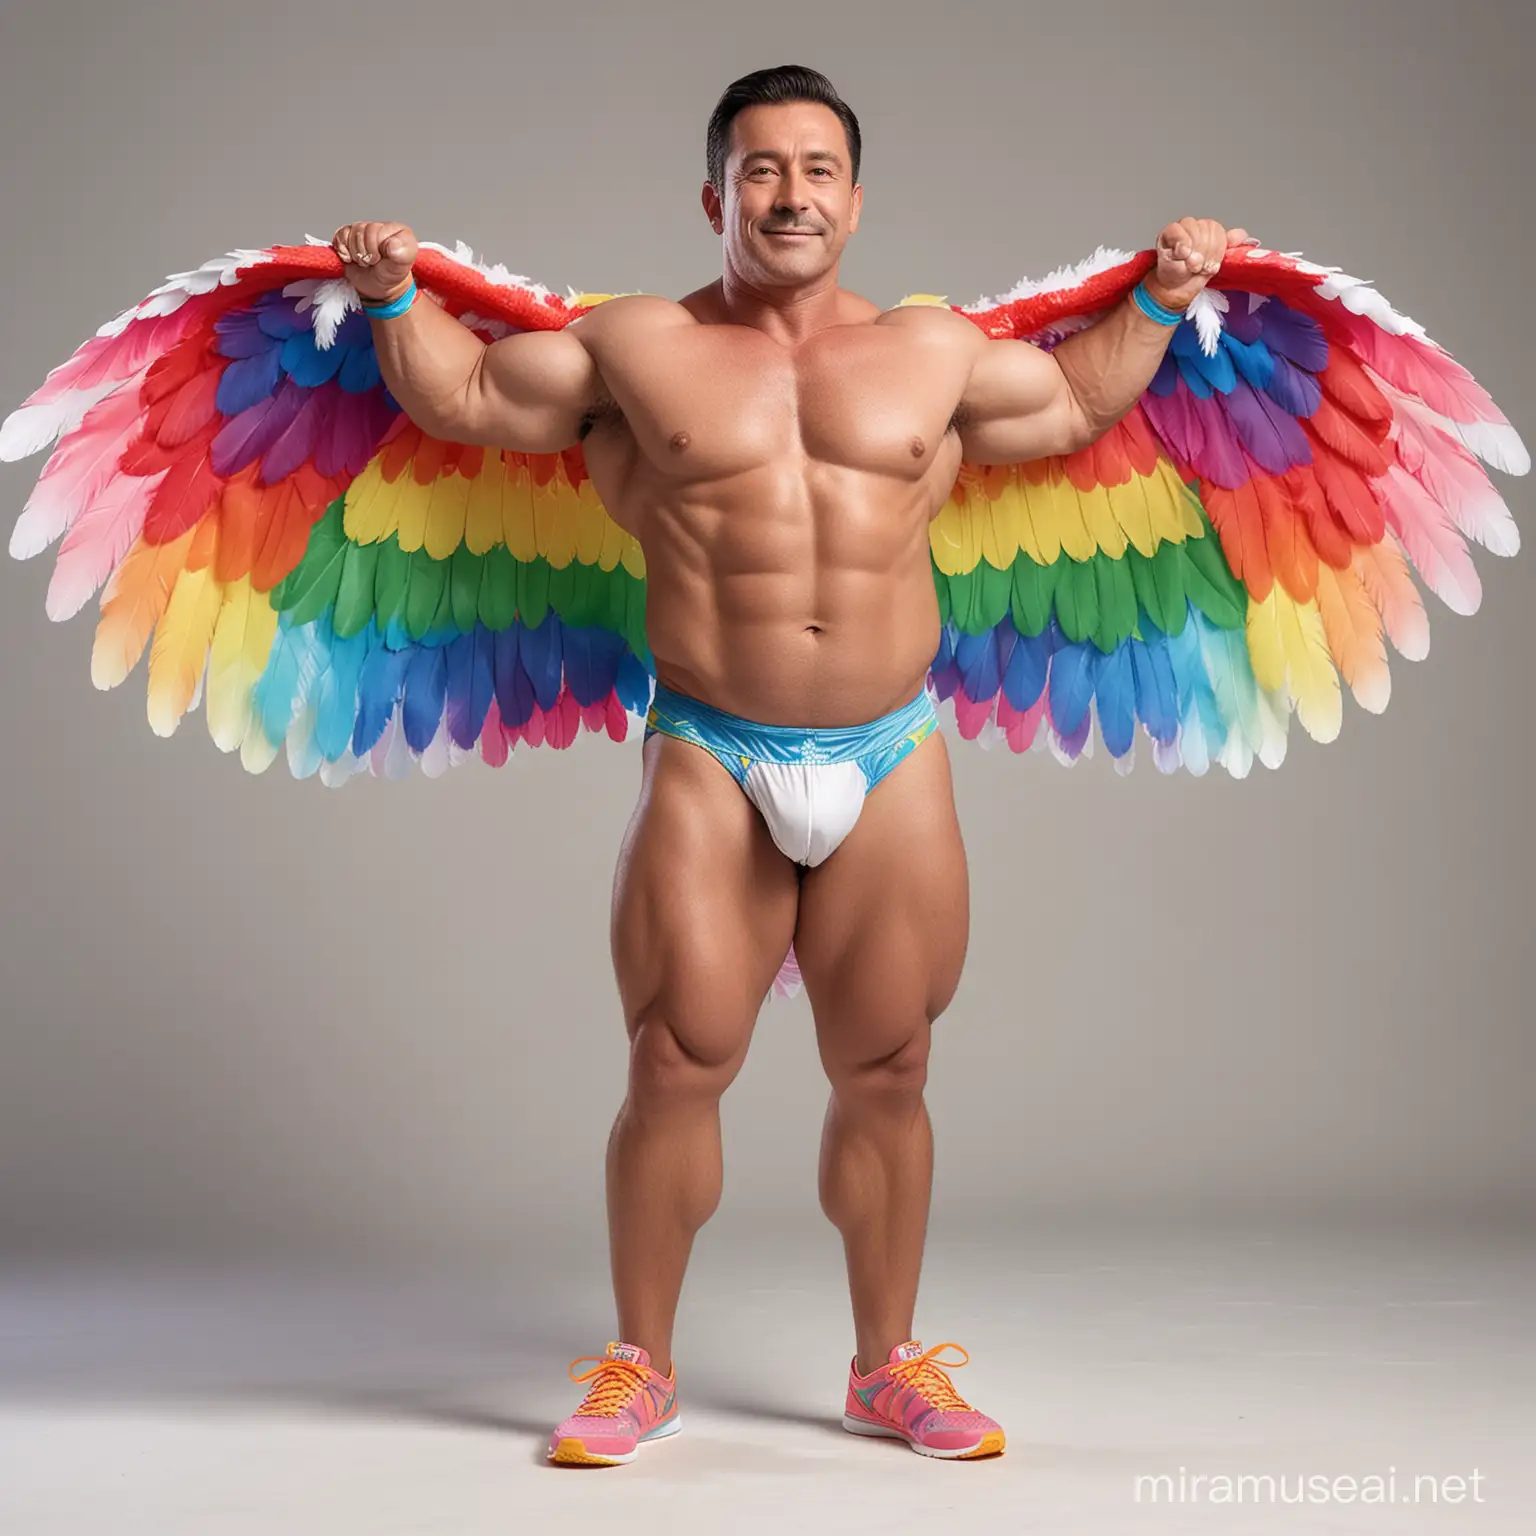 Ultra Chunky Bodybuilder Daddy Flexing with Rainbow Colored See Through Eagle Wings